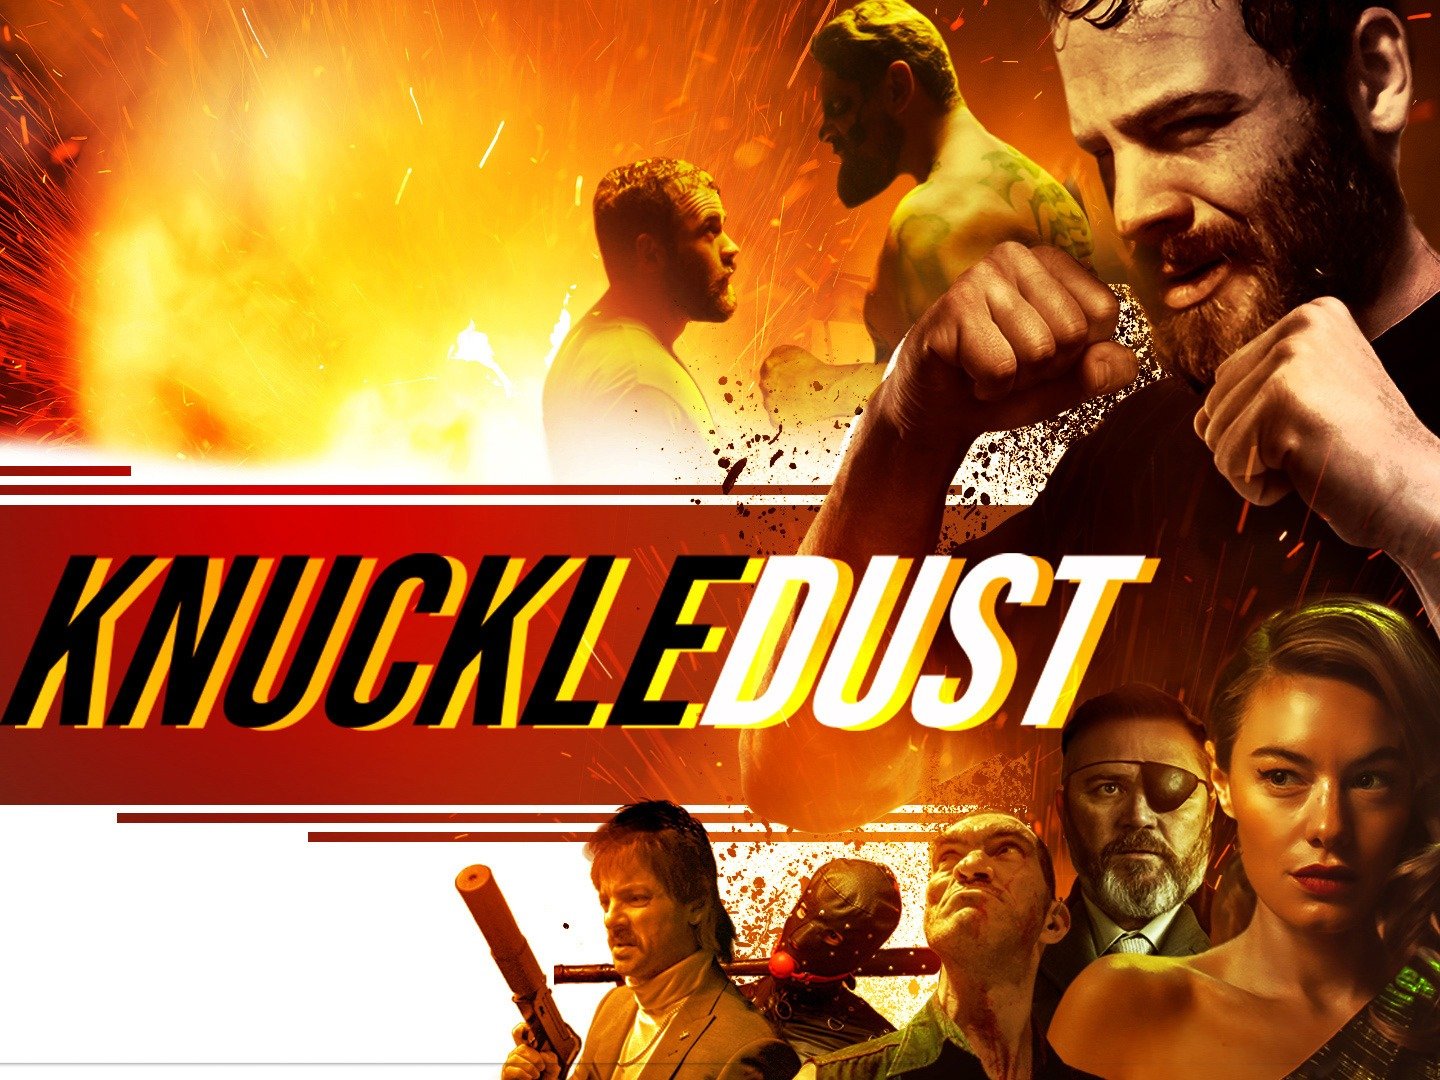 Knuckledust Trailer Trailers Videos Rotten Tomatoes